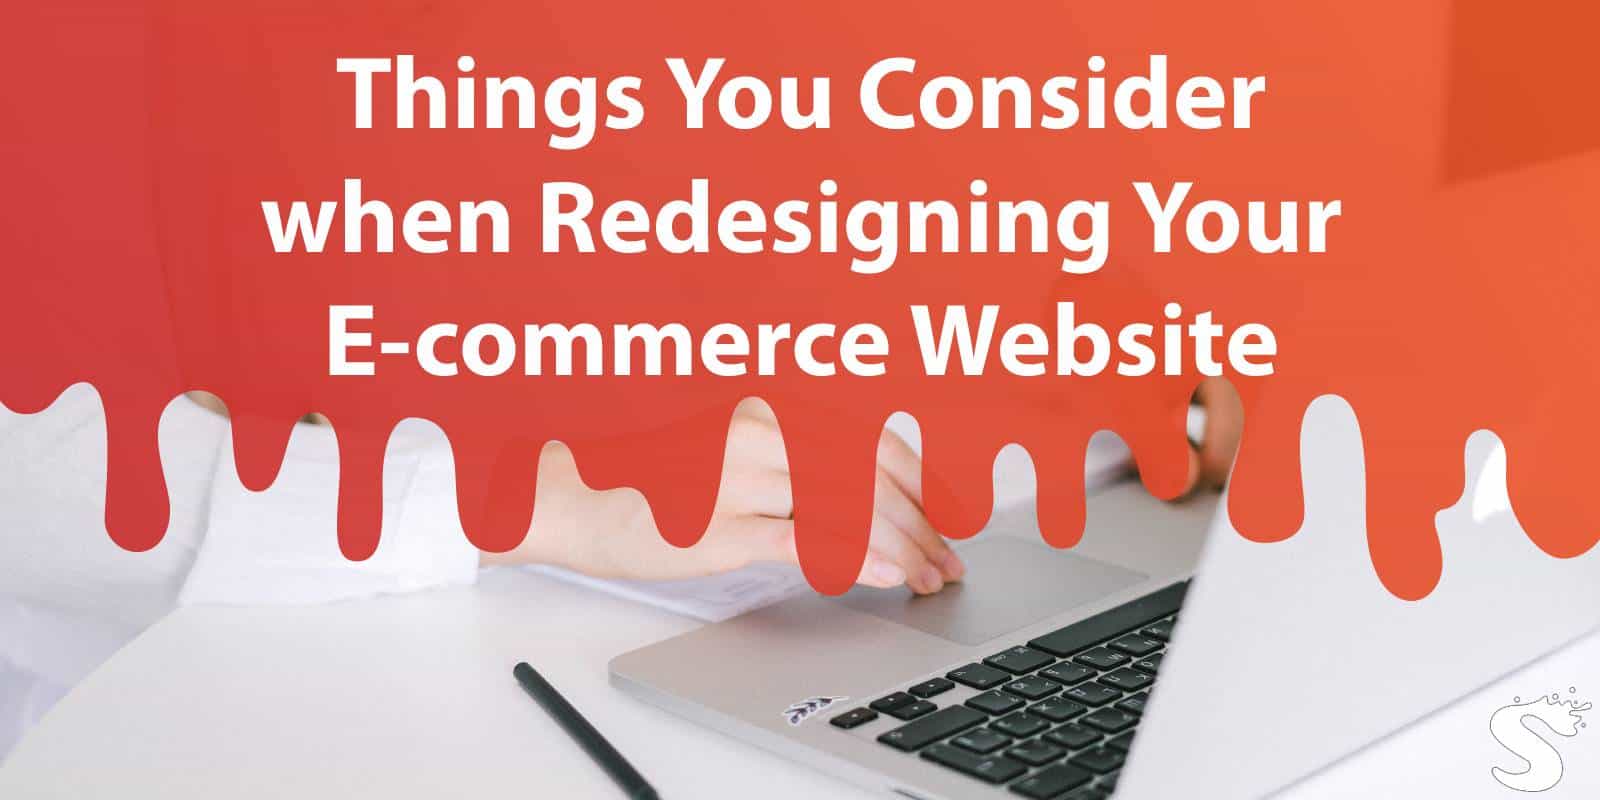 Things You Consider when Redesigning Your E-commerce Website